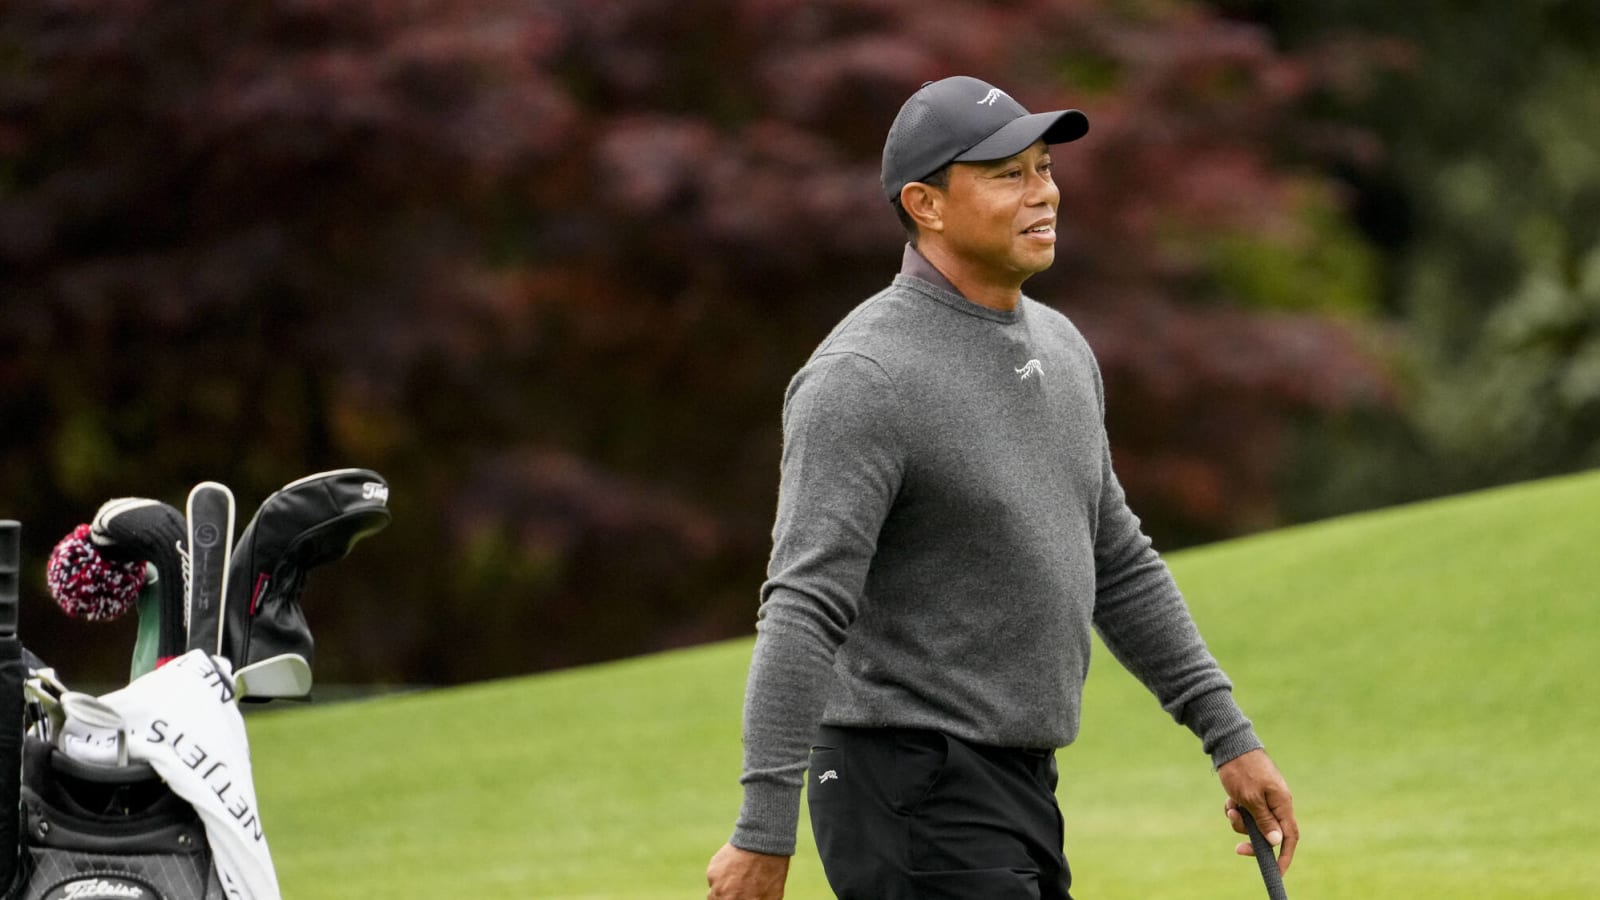 Will Zalatoris claims Tiger Woods played ‘great’ during practice round ahead of 2024 Masters